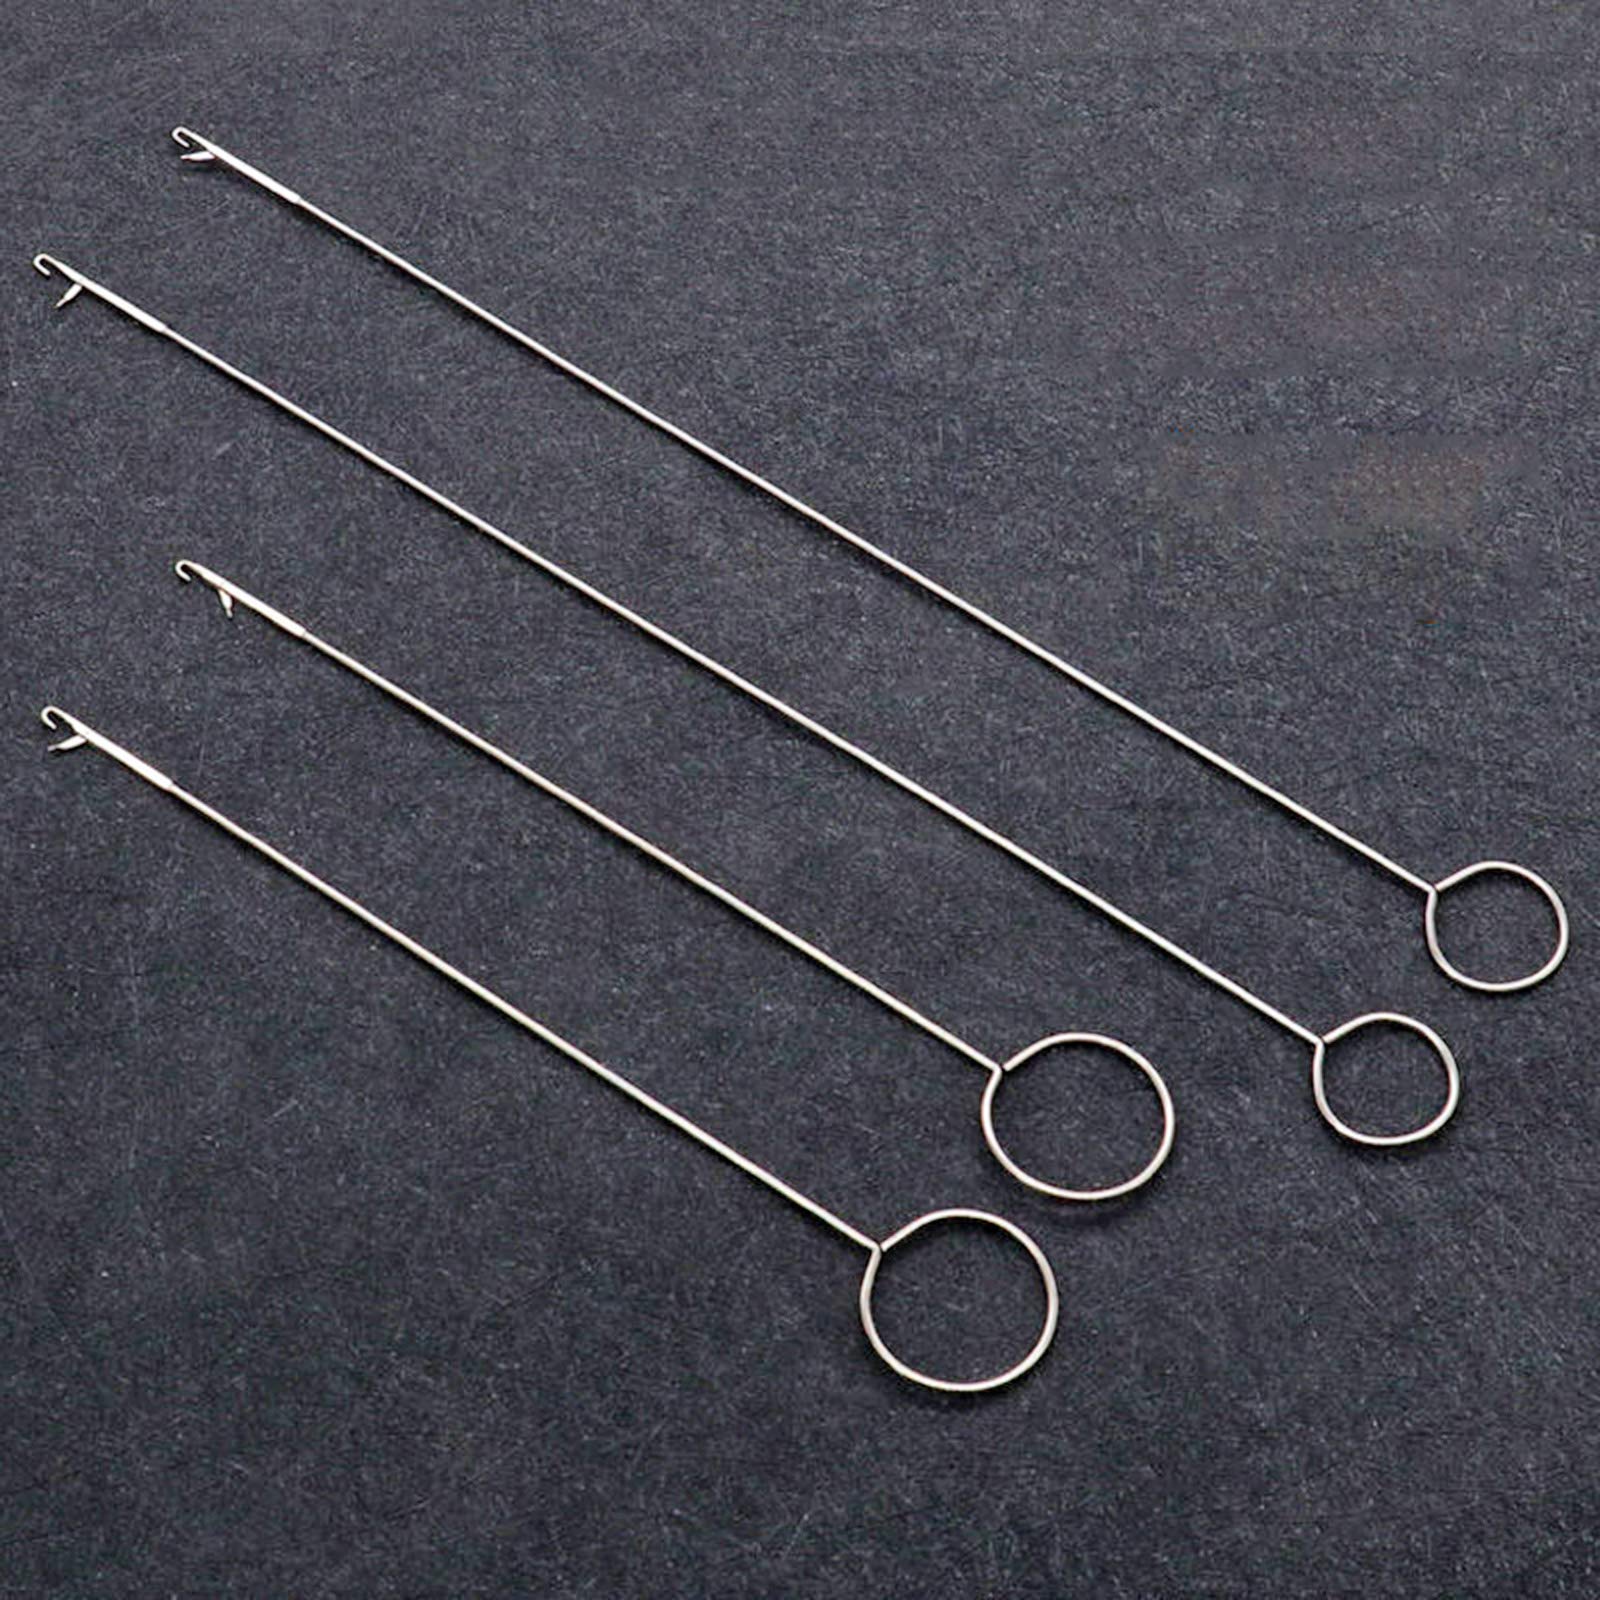 2pcs/lot Needle Hook, Latch Hook Supplies, Tongue Crochet Tool, Sewing Loop  Turner Hook with Latch for Fabric Tube Straps Belts - AliExpress